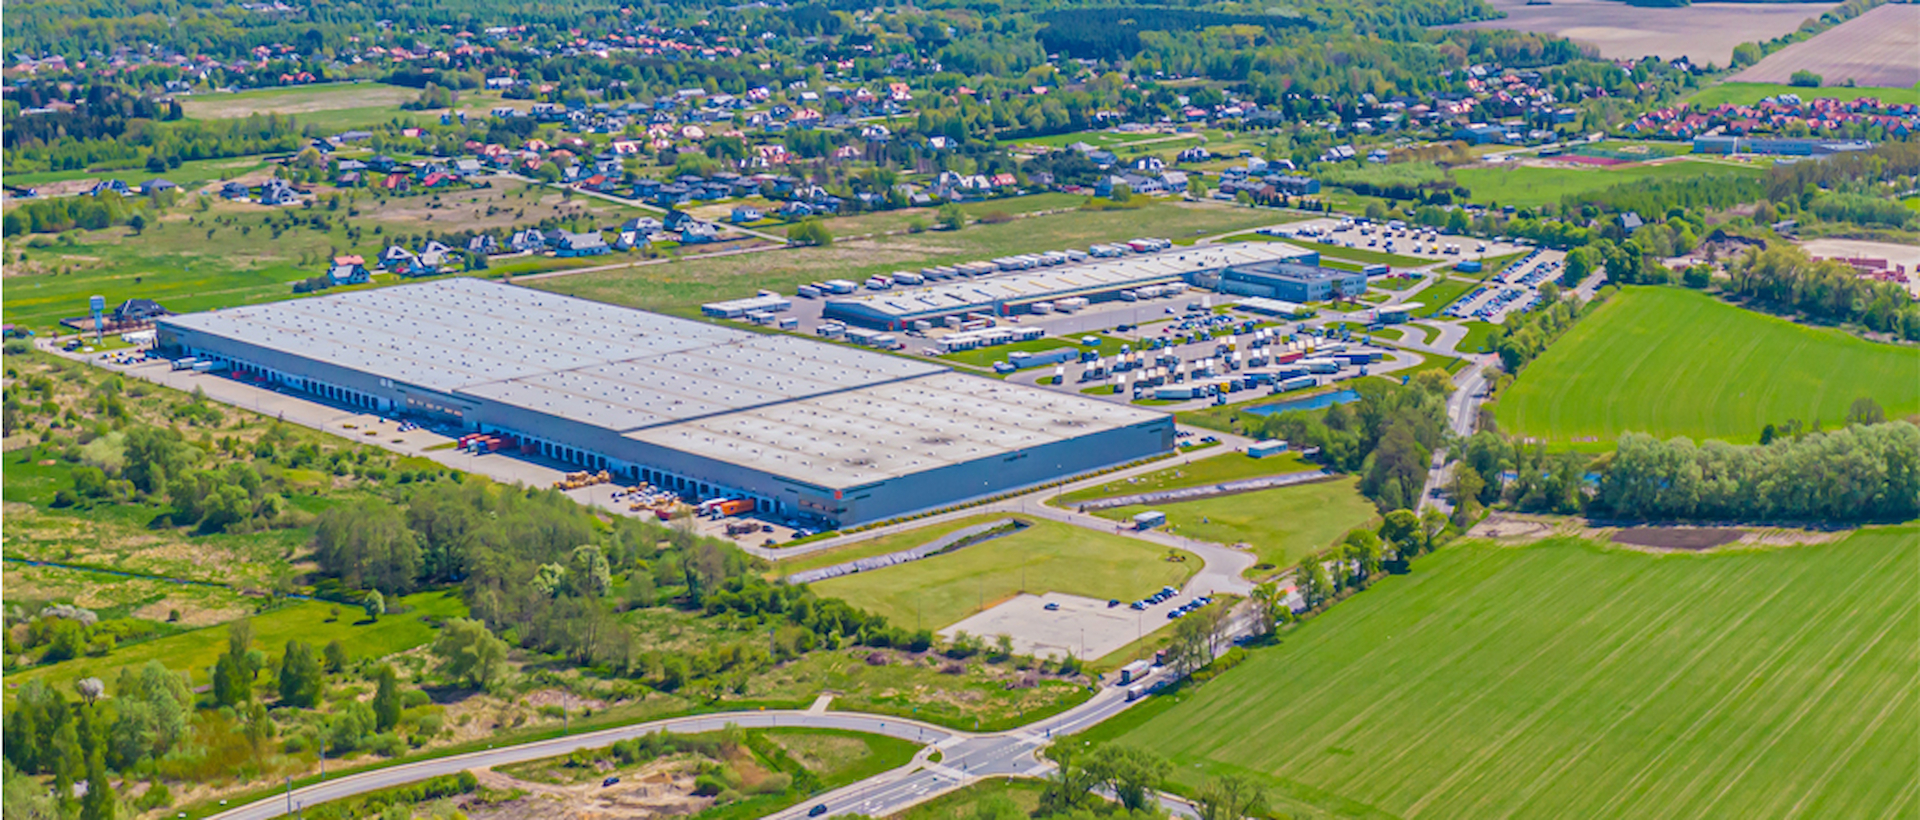 CommercialEdge Client Spotlight: PS Business Parks Meets Market Demand With Fine-Tuned Operations